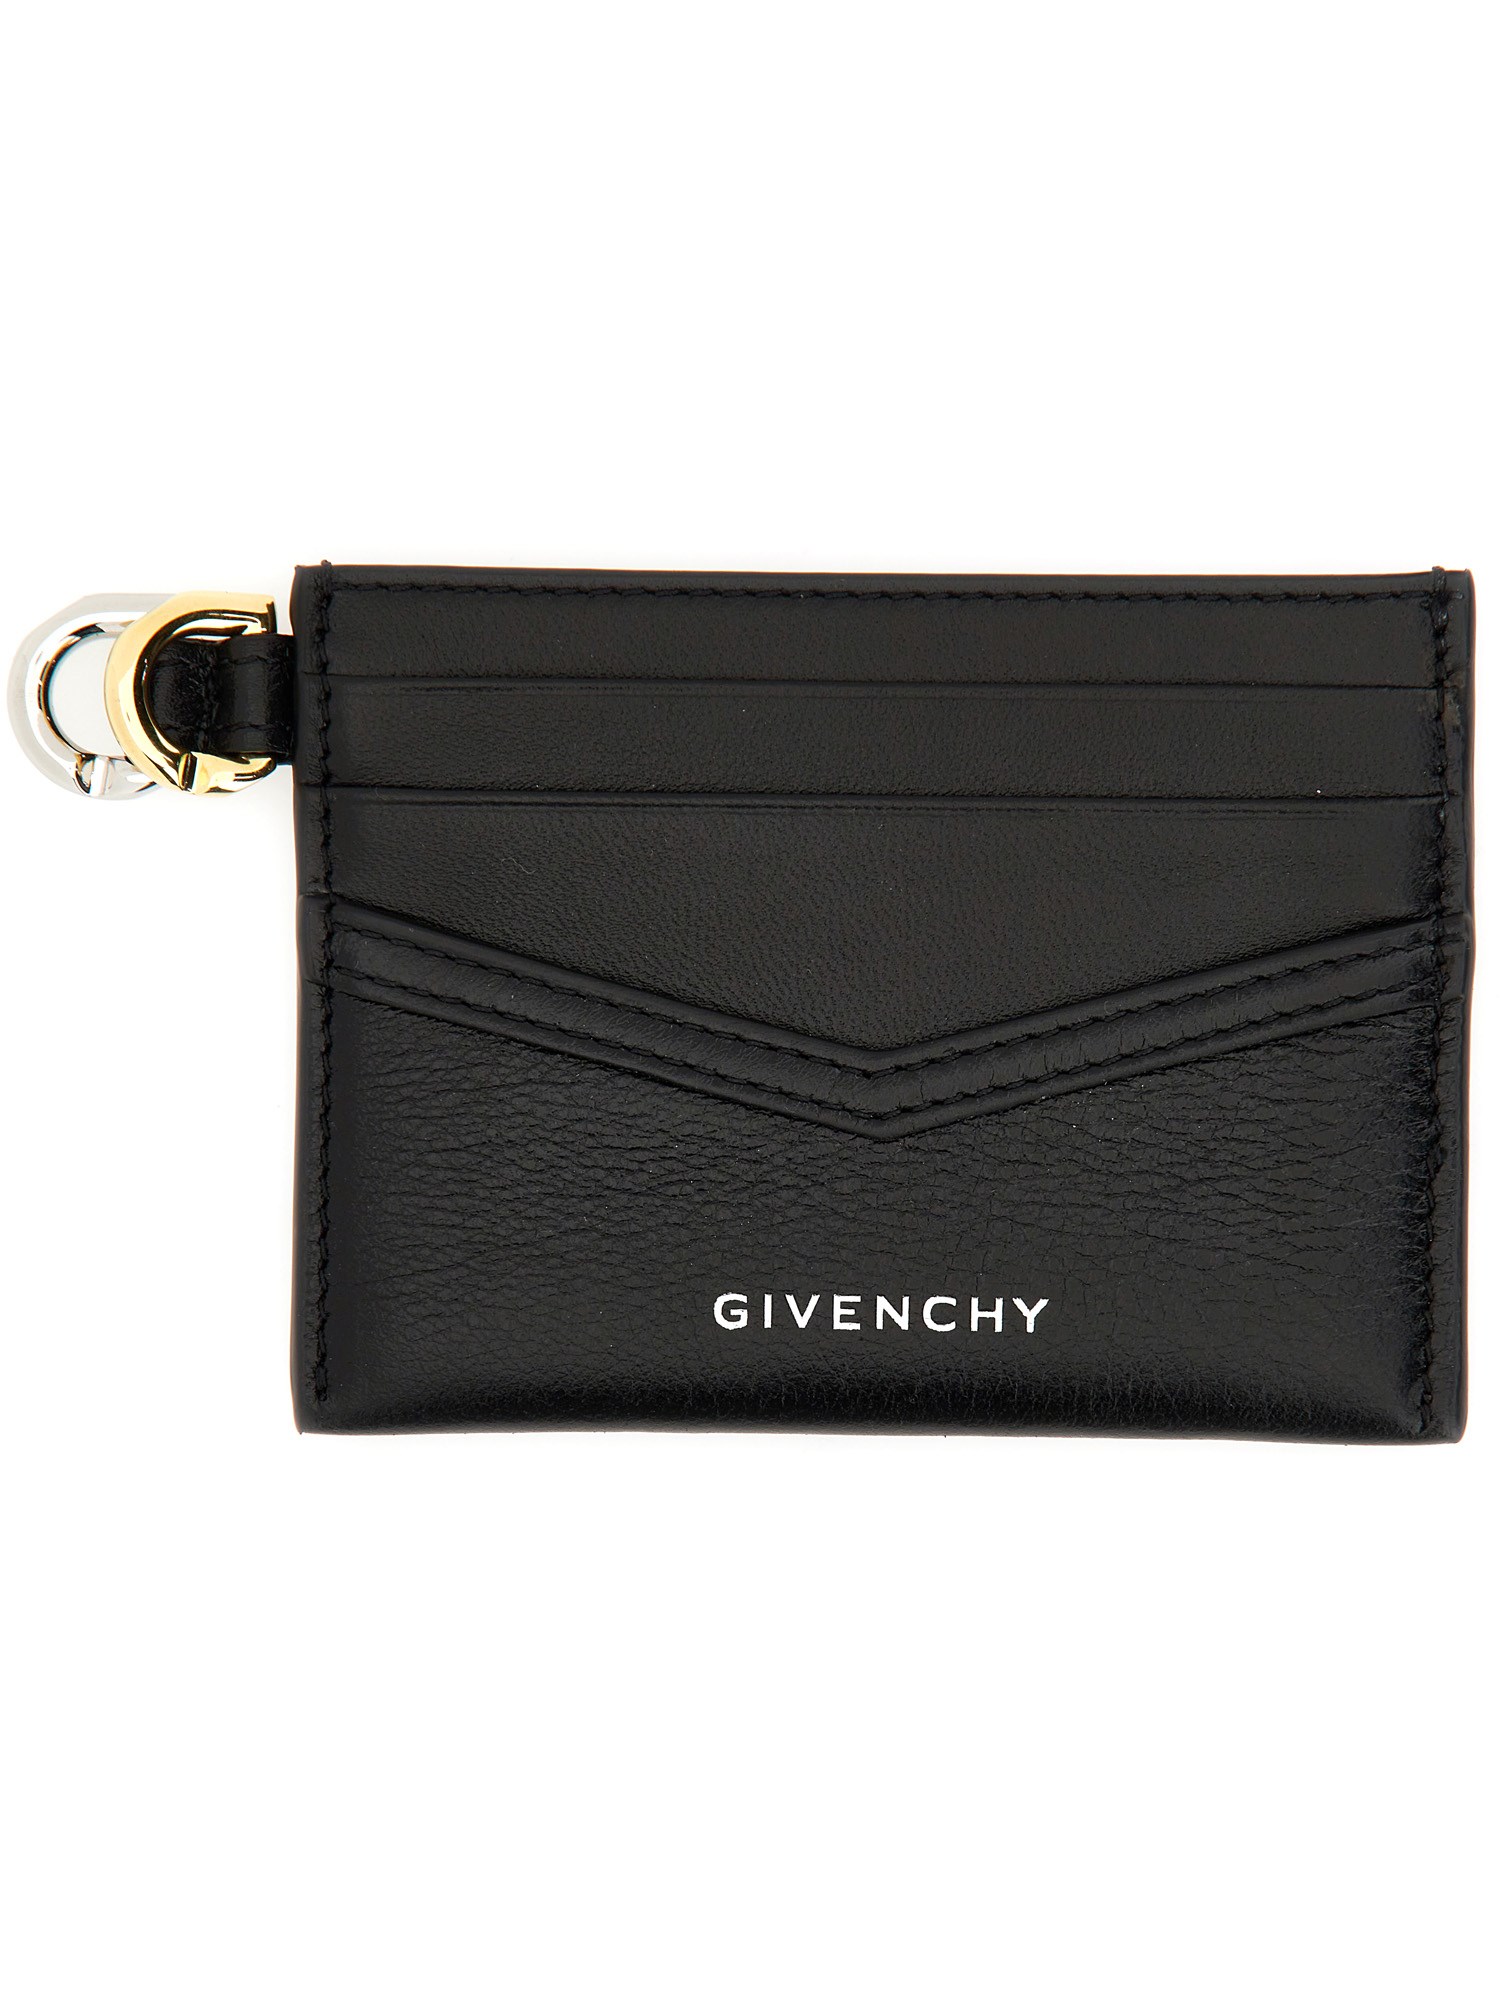 Givenchy givenchy card holder "voyou"